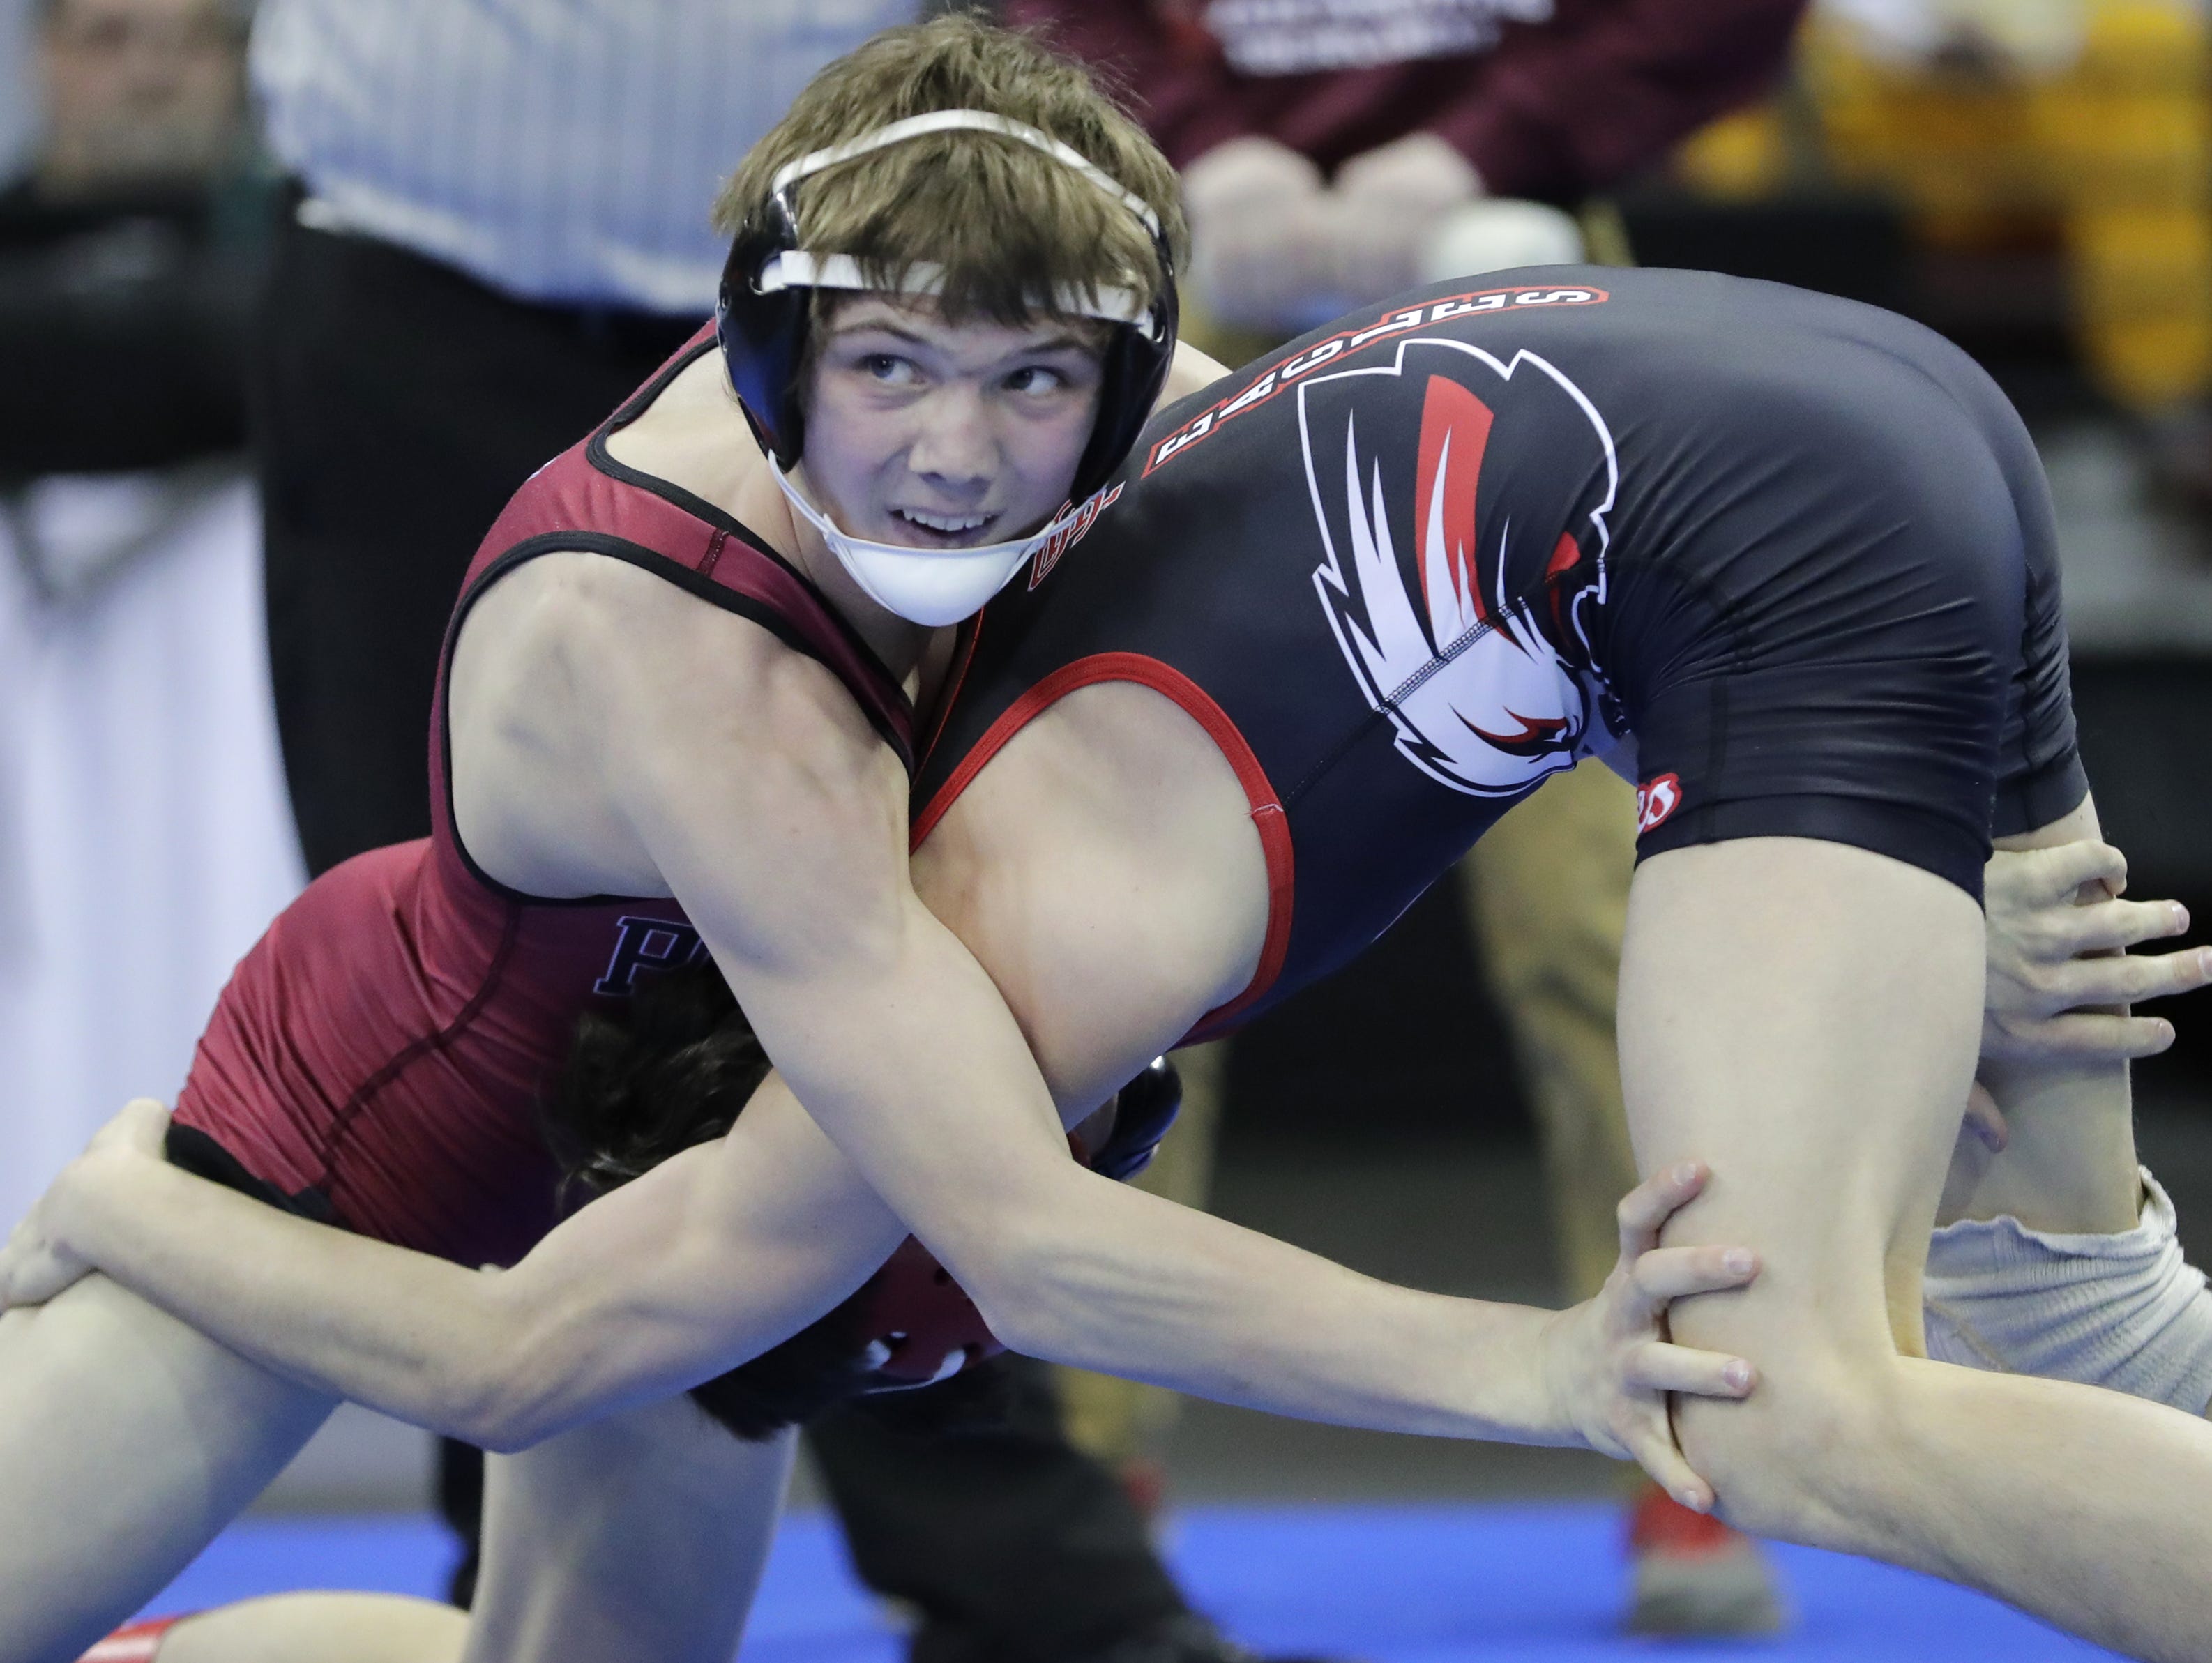 Pulaski sophomore Cole Gille glances at the clock while wrestling Sauk Prairie's Dylan Herbrand during their WIAA Division 1 113-pound quarterfinal match on Thursday at the Kohl Center in Madison. Cole won the match 6-3 to advance to the state semifinals.